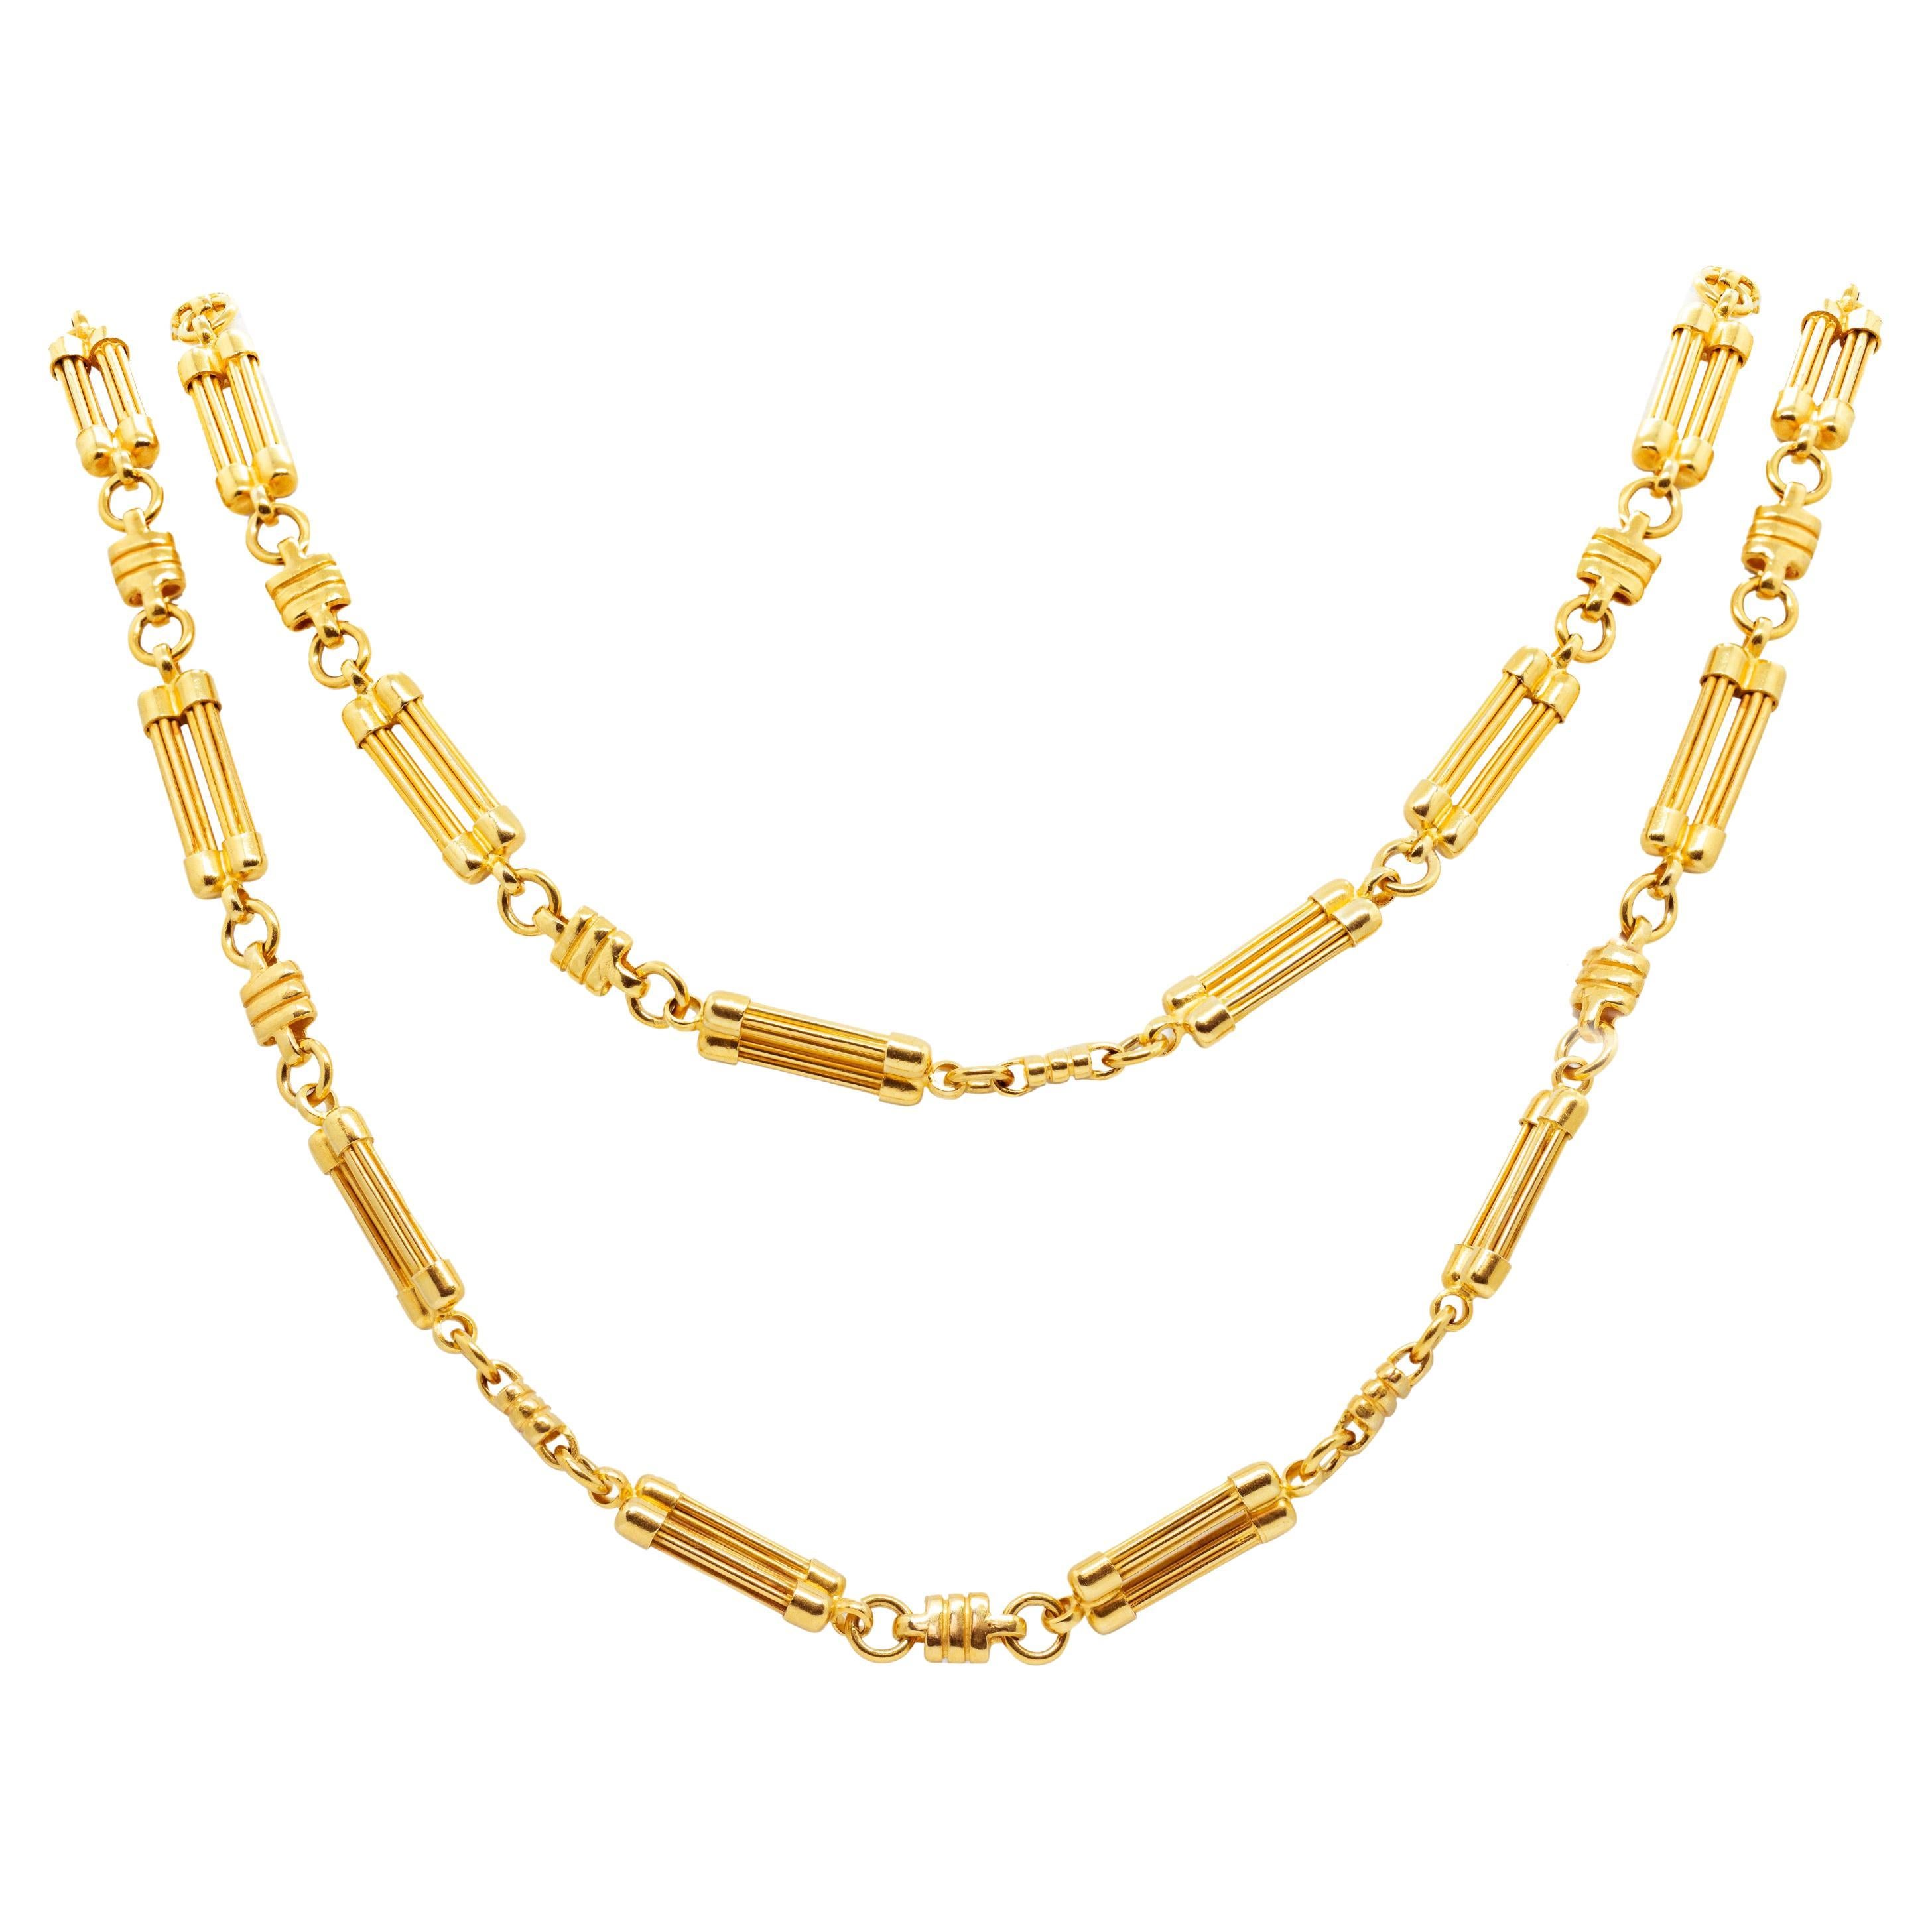 This fancy 18 carat yellow gold chain necklace is beautifully designed with alternating textured double bar links and small textured square links. The sturdy necklace secures with a lobster clasp for guaranteed safe wear, measures 42 inches in